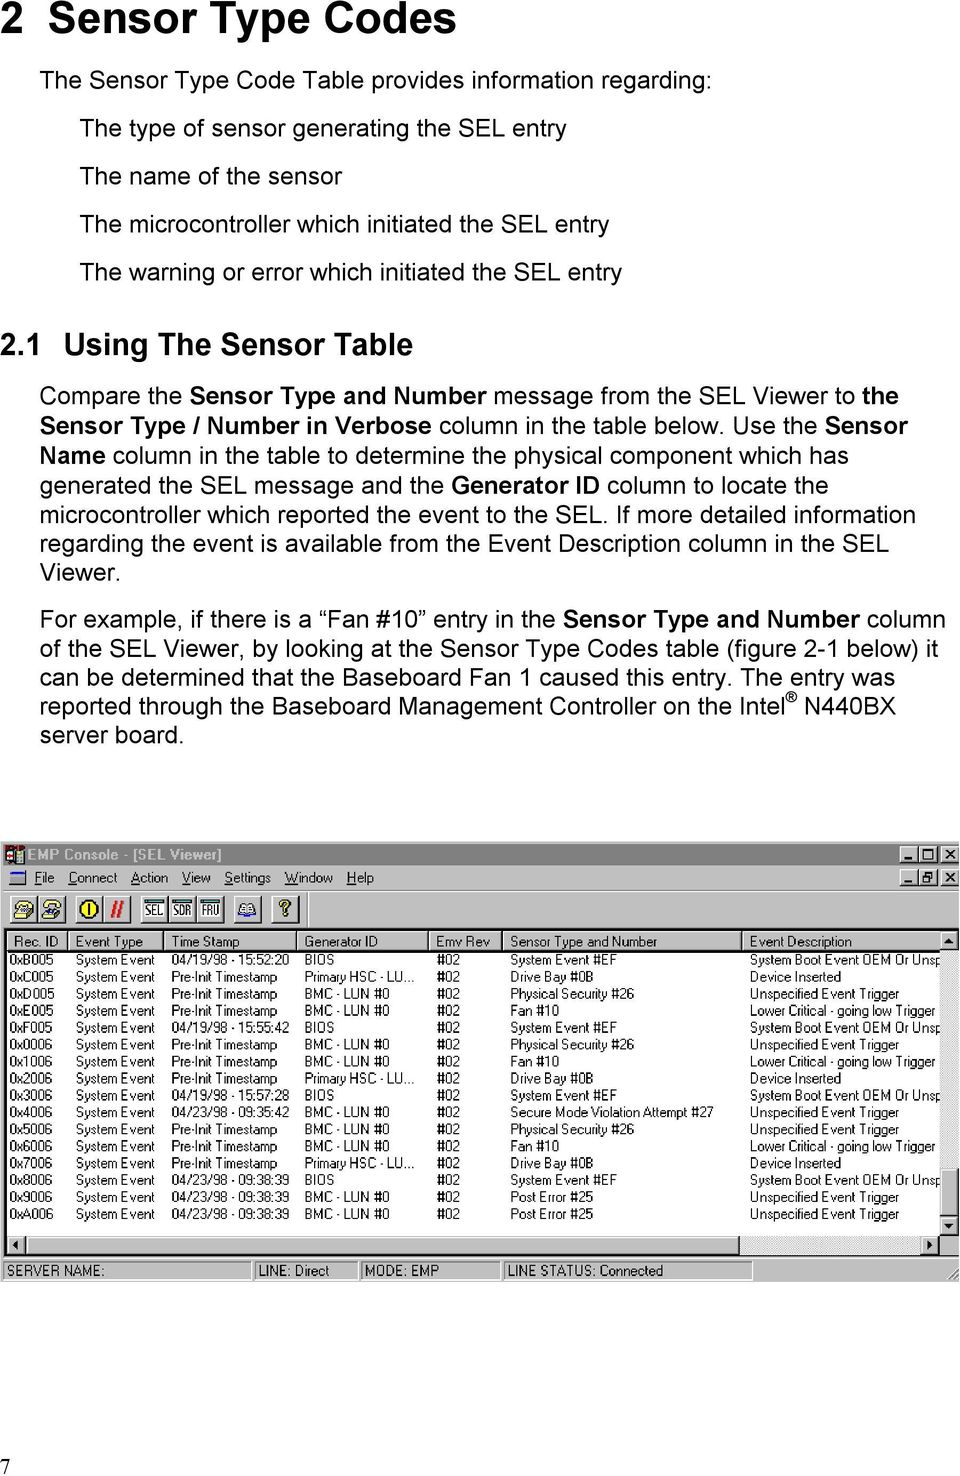 1 Using The Sensor Table Compare the Sensor Type and Number message from the SEL Viewer to the Sensor Type / Number in Verbose column in the table below.